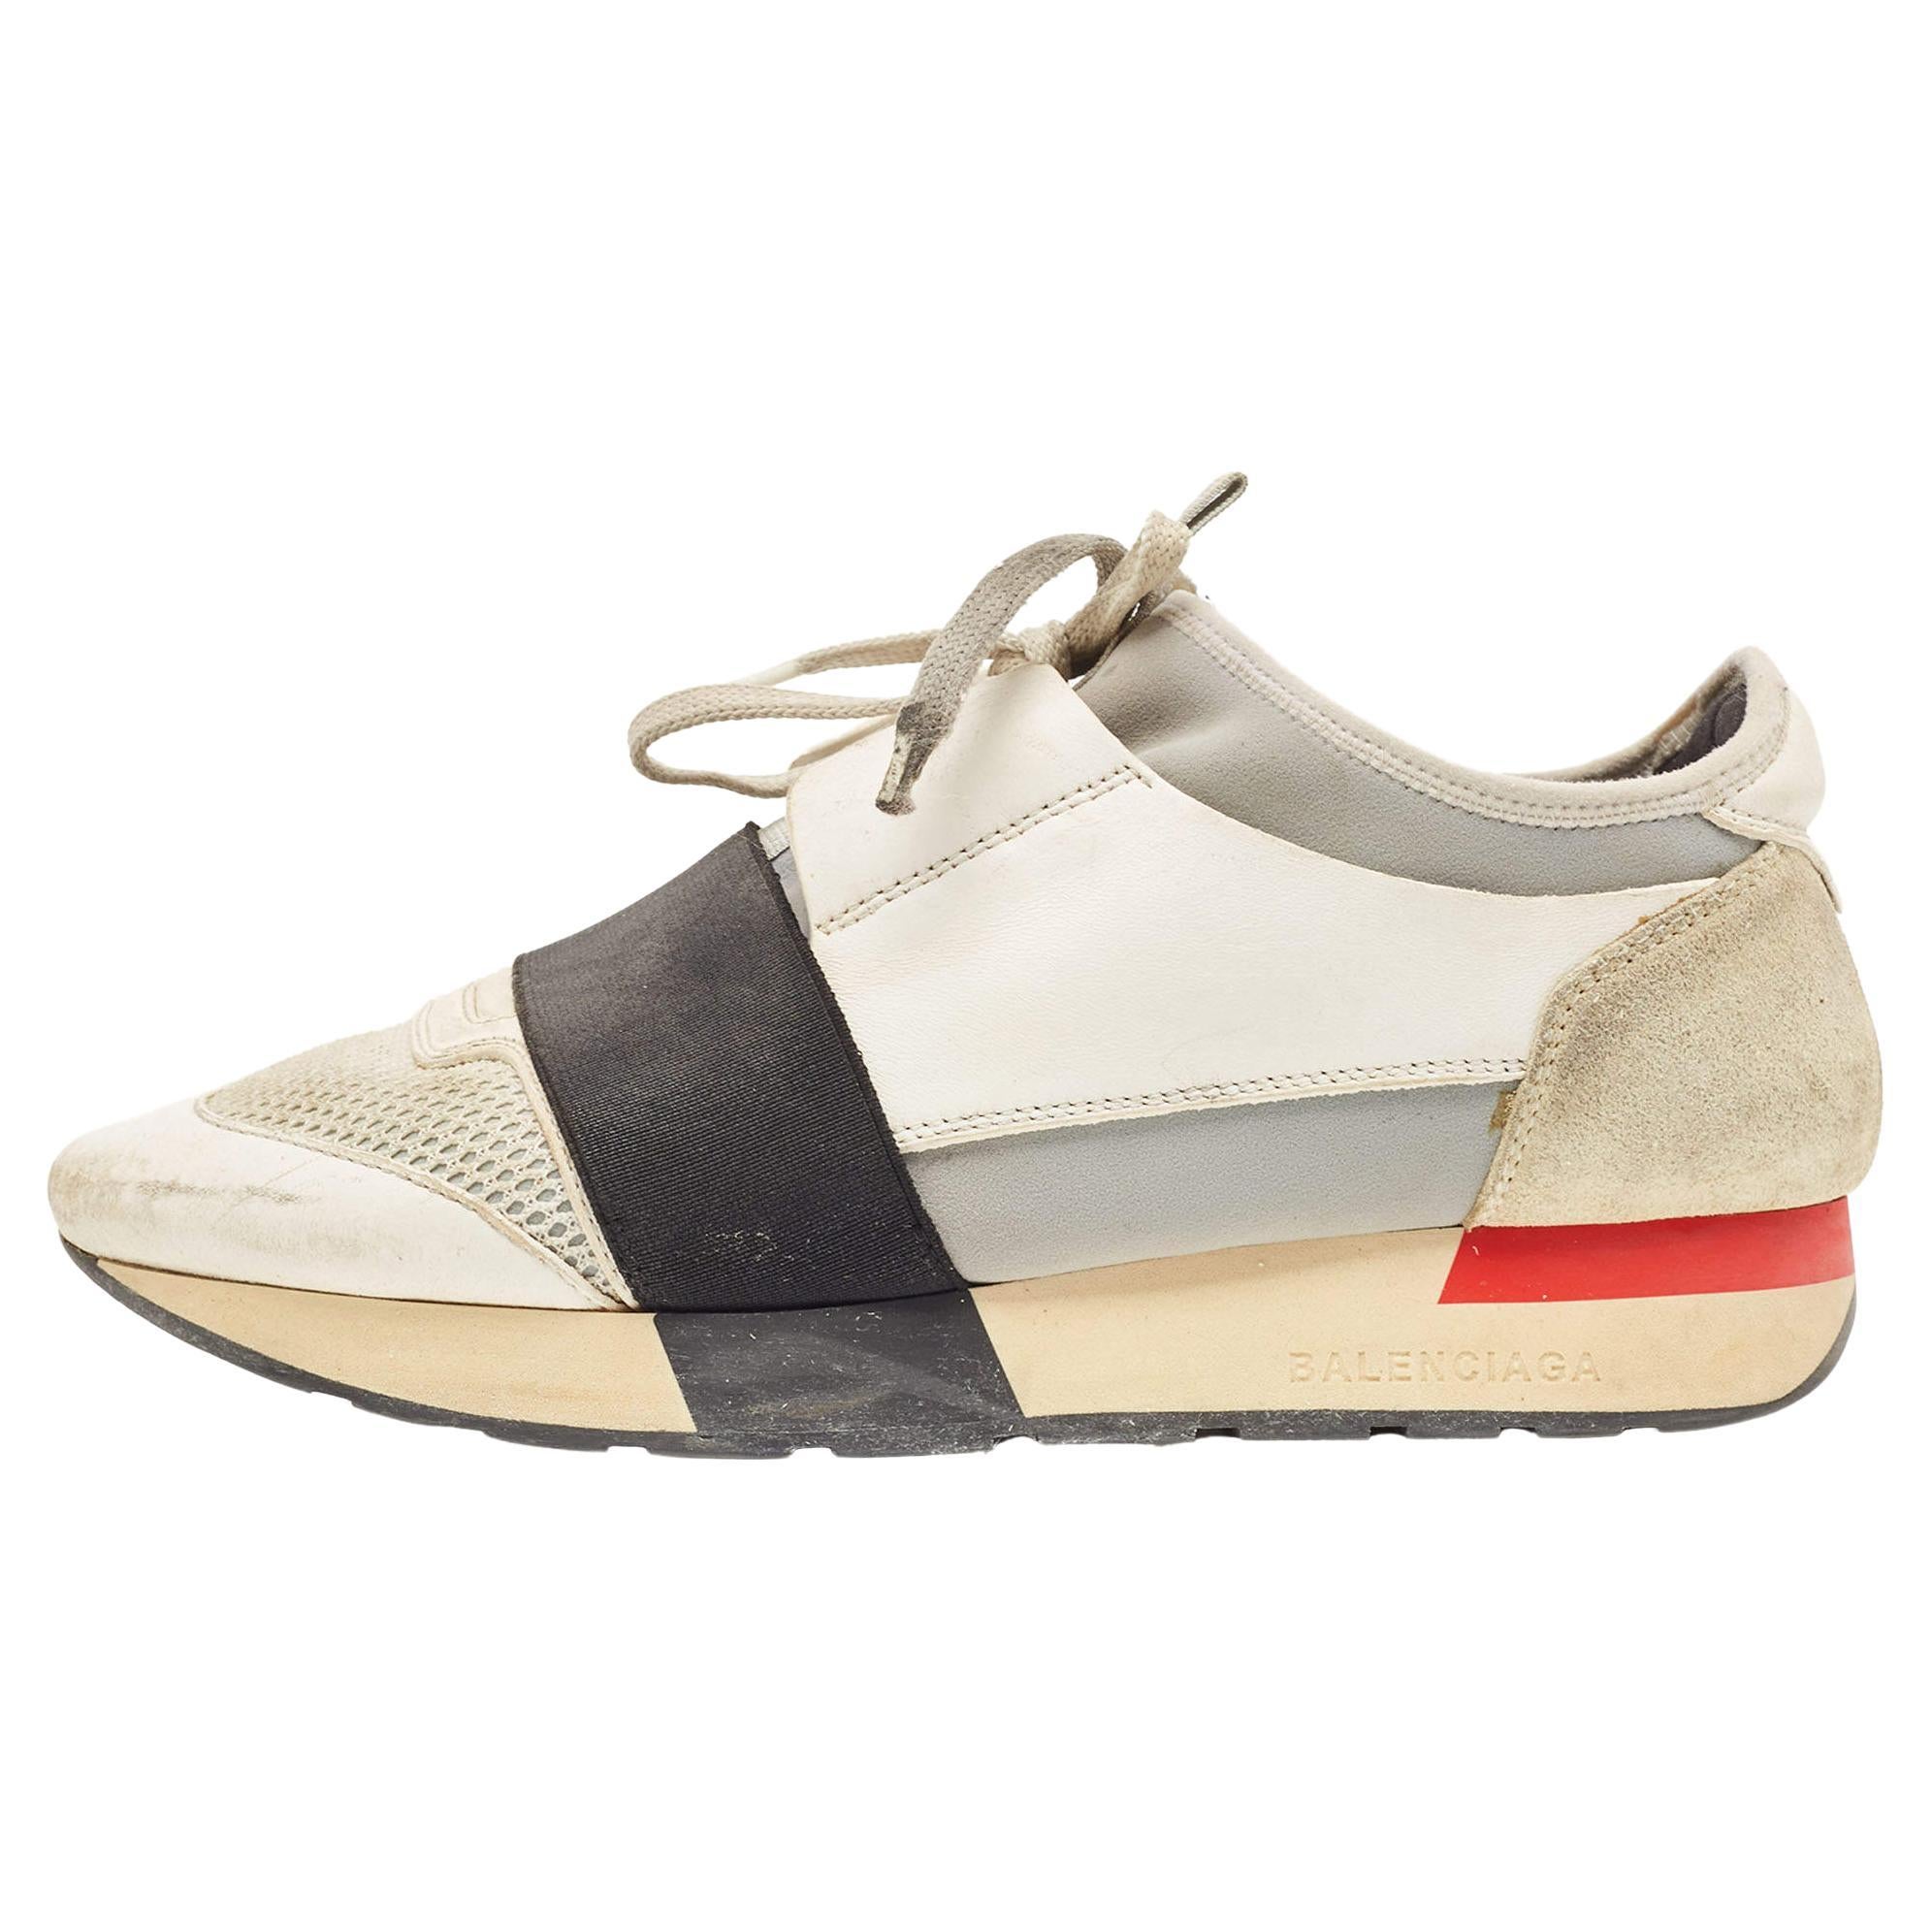 Balenciaga Multicolor Suede and Leather Race Runner Sneakers Size 37 For Sale